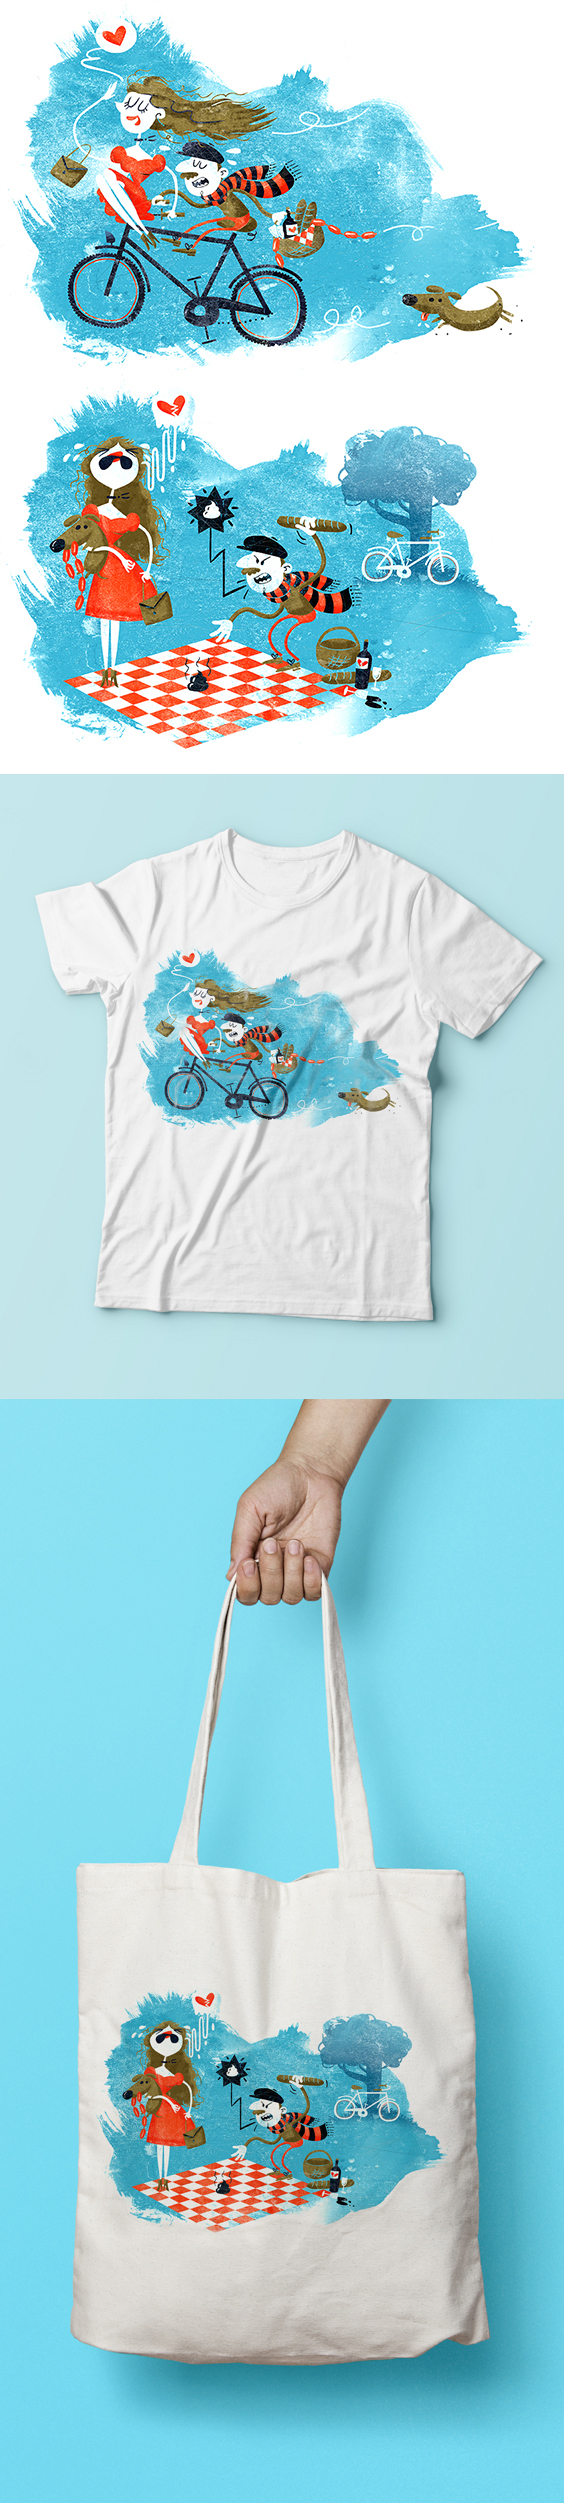 Two whimsical bike illustrations for T-shirt and tote bags. By Stina Norgren